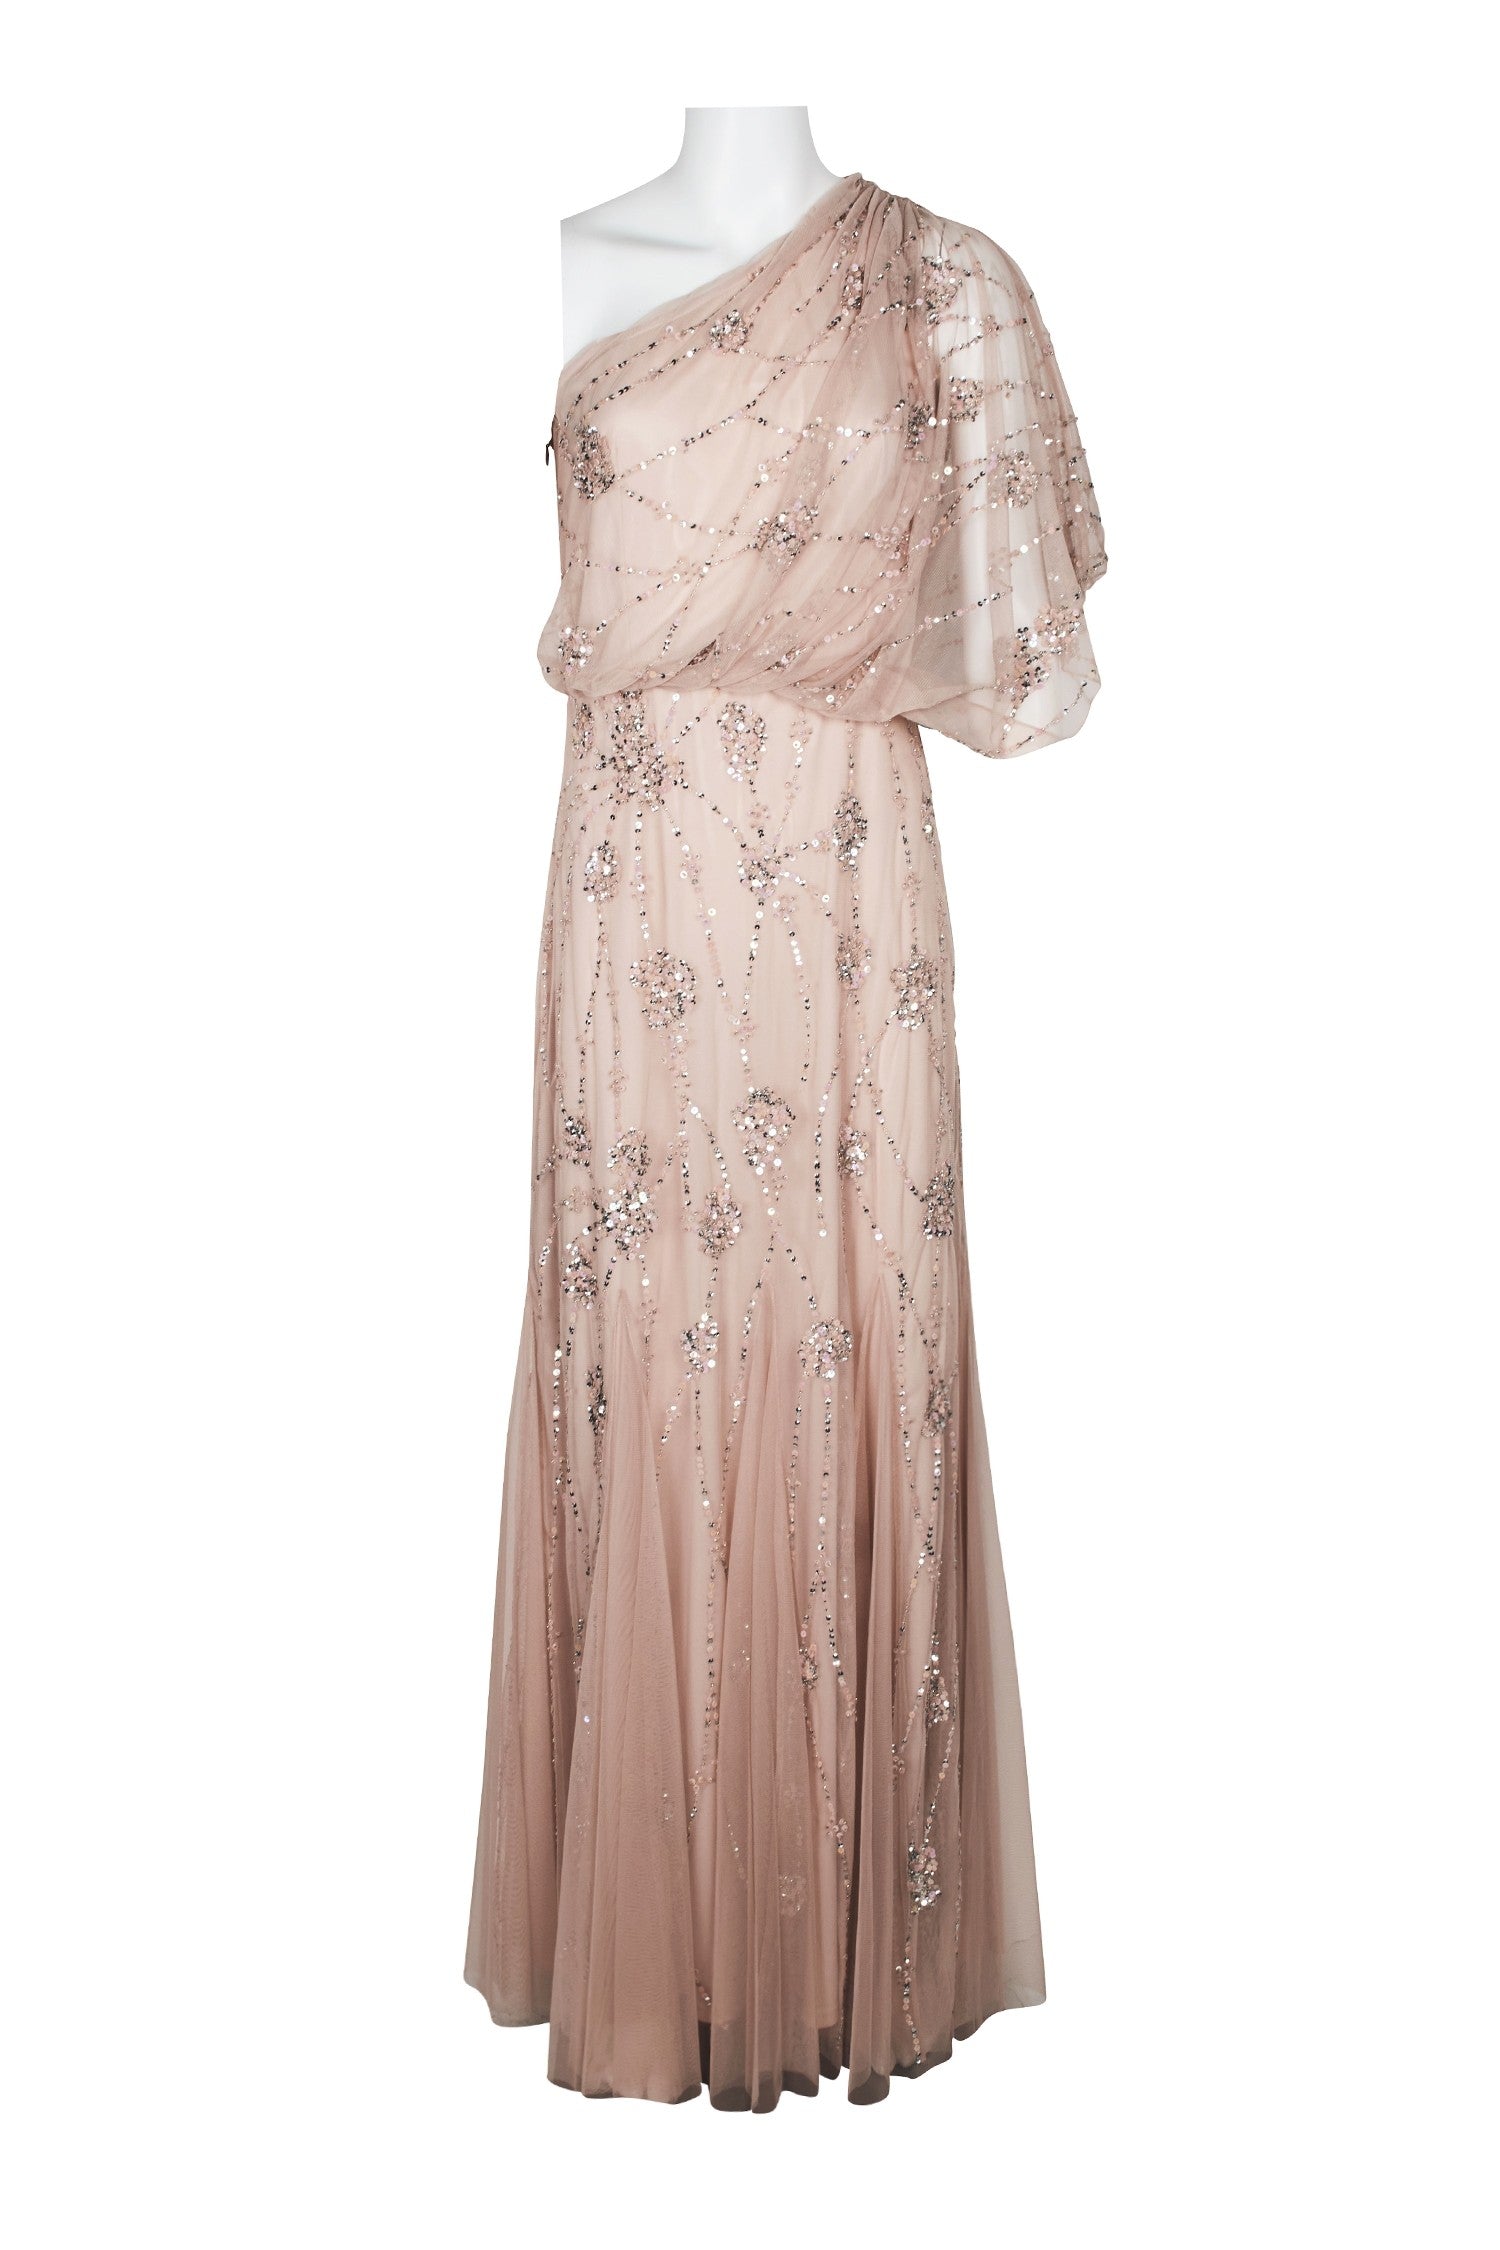 Adrianna Papell One Shoulder Beaded Gown - Blush